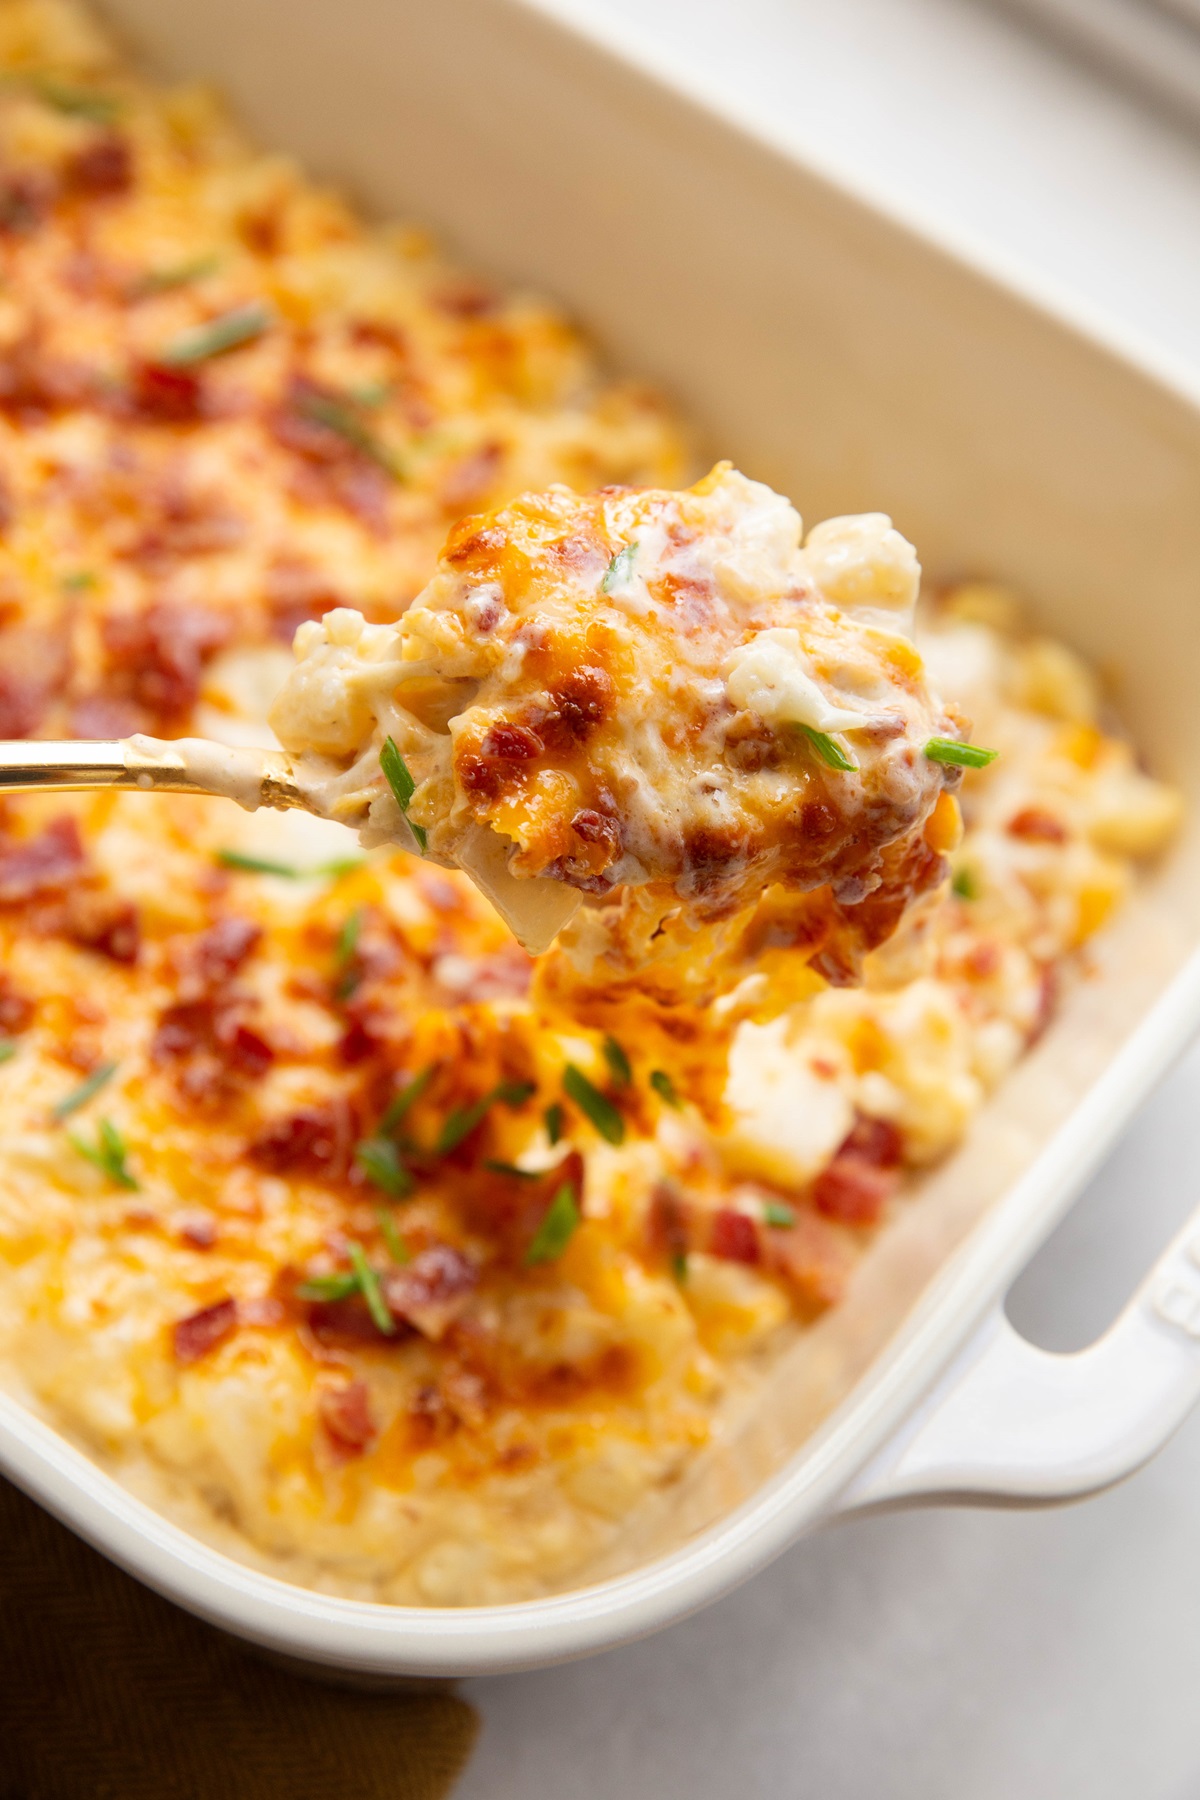 Spoon scooping cauliflower mac and cheese out of a casserole dish.